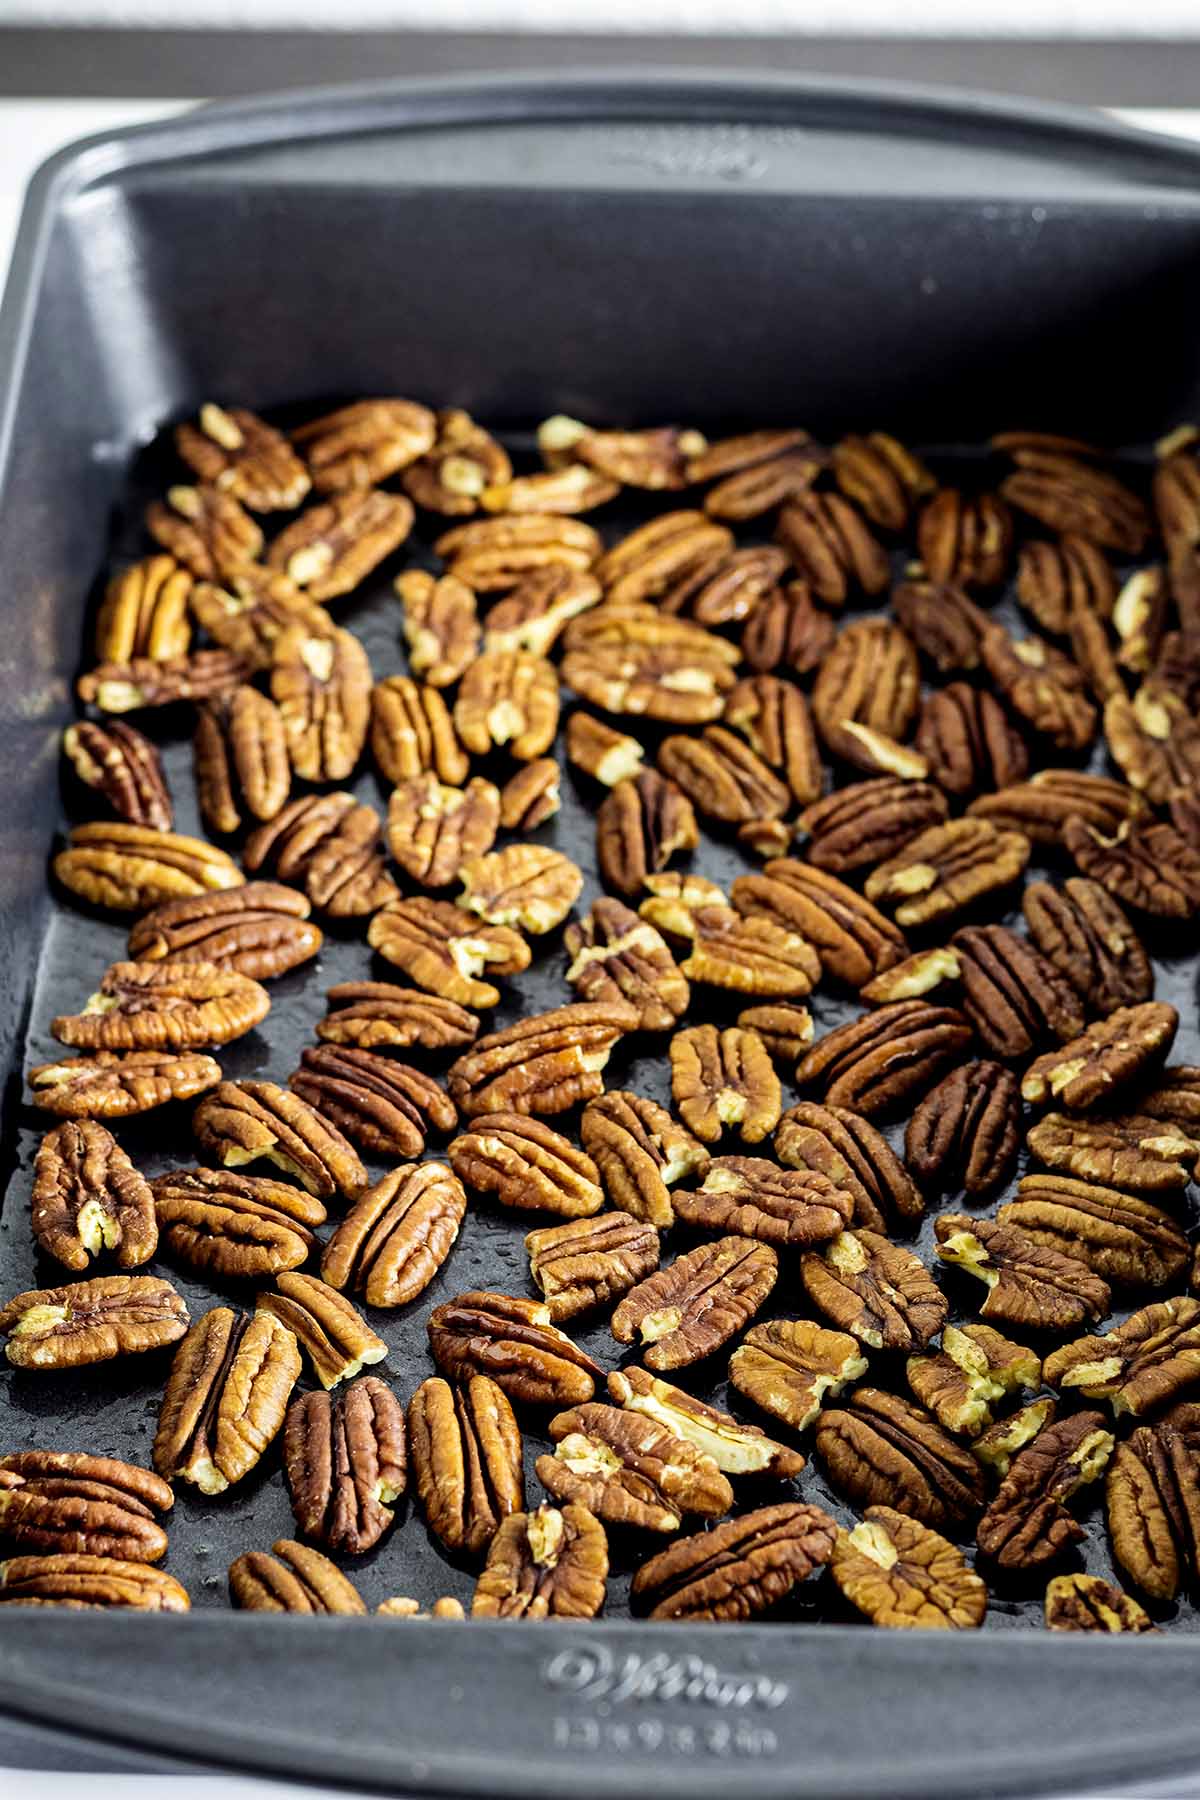 Raw whole pecans in a baking pan.